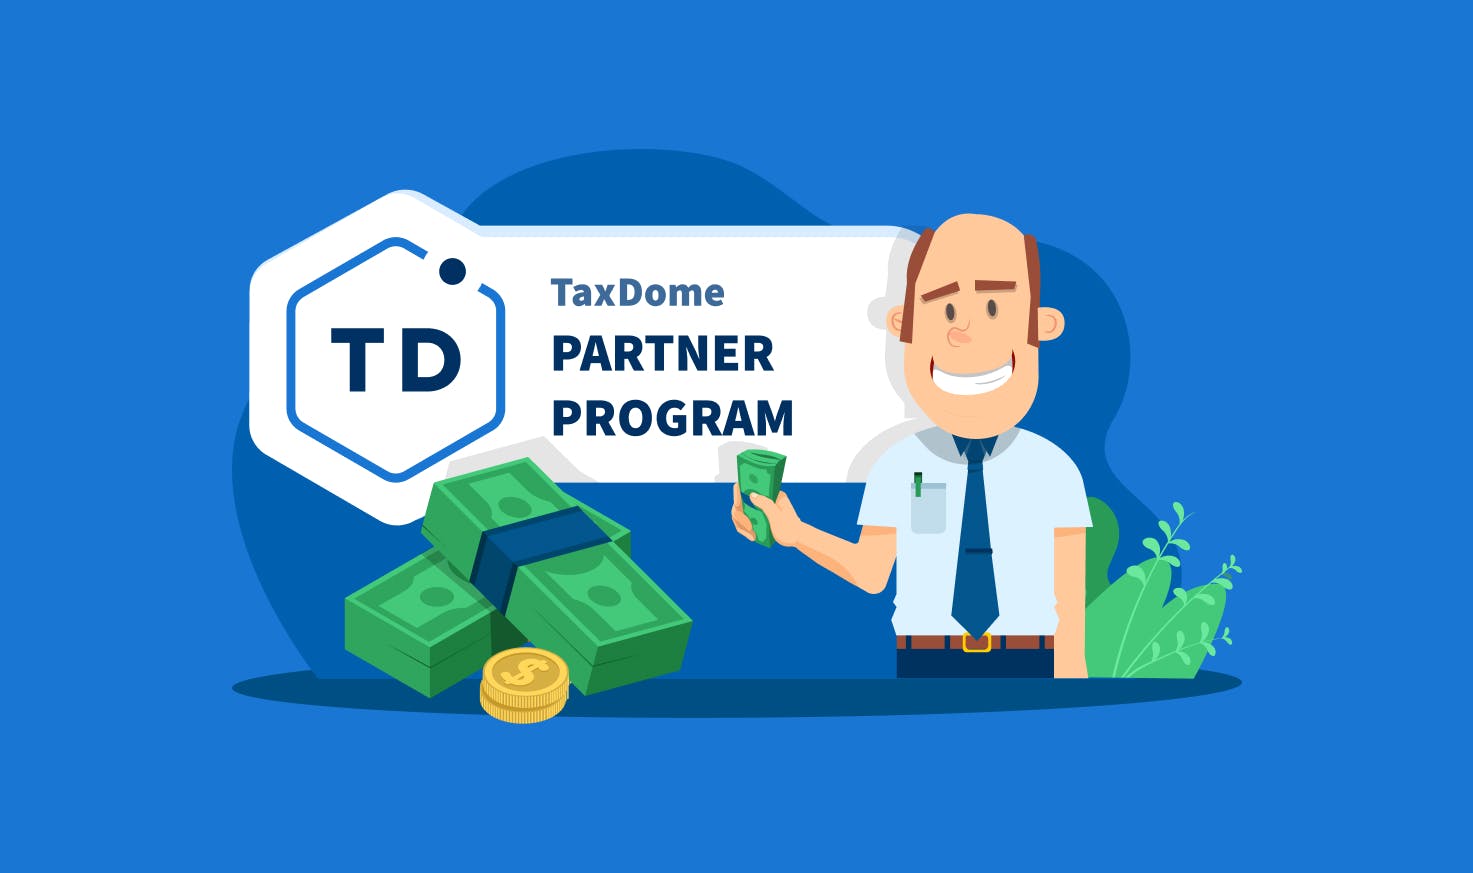 TaxDome partner program launched